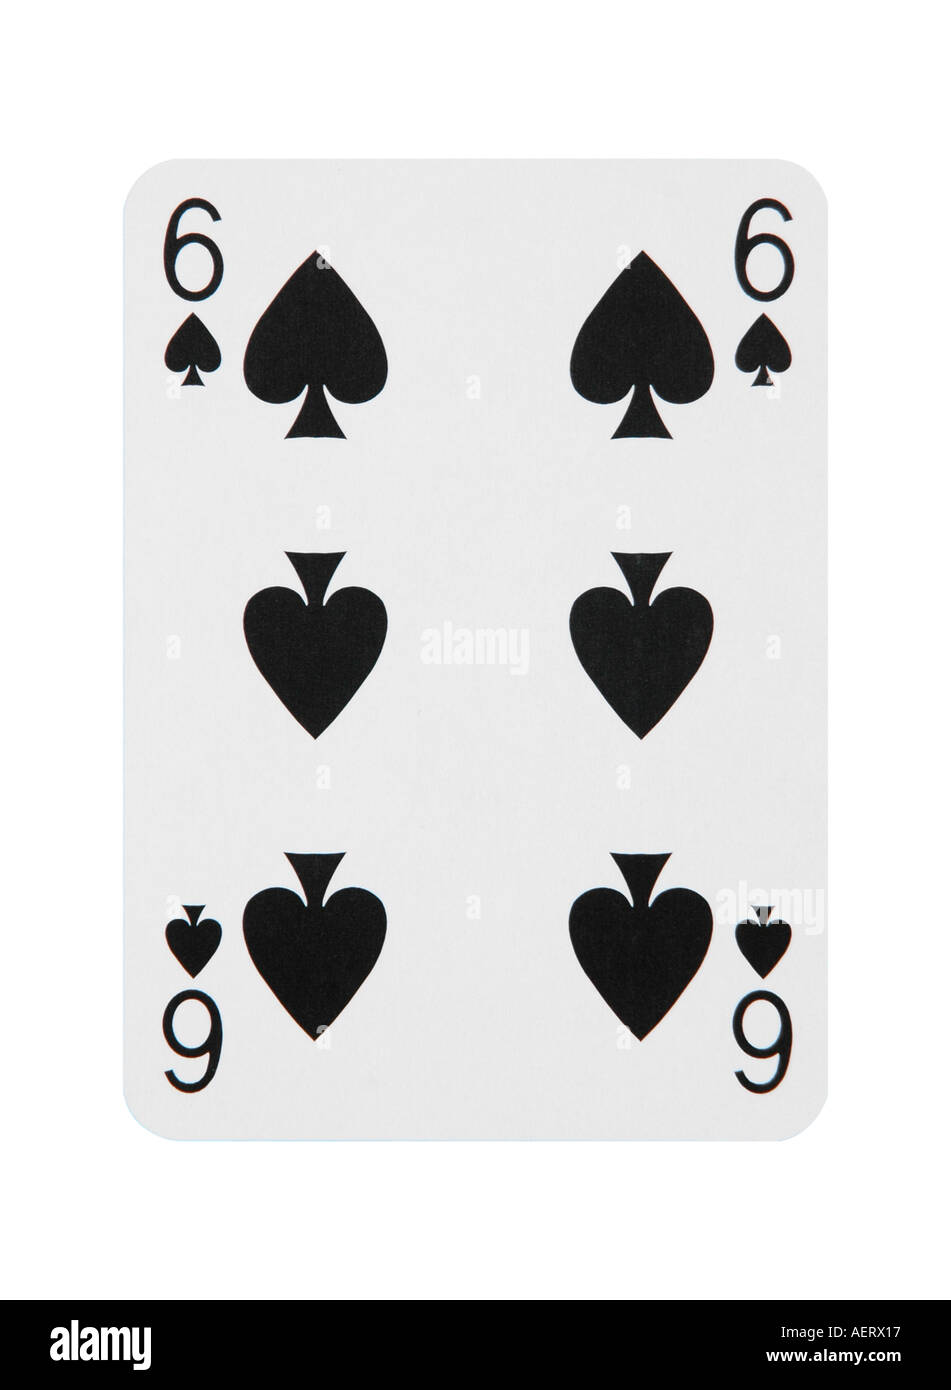 6 of spades card Stock Photo